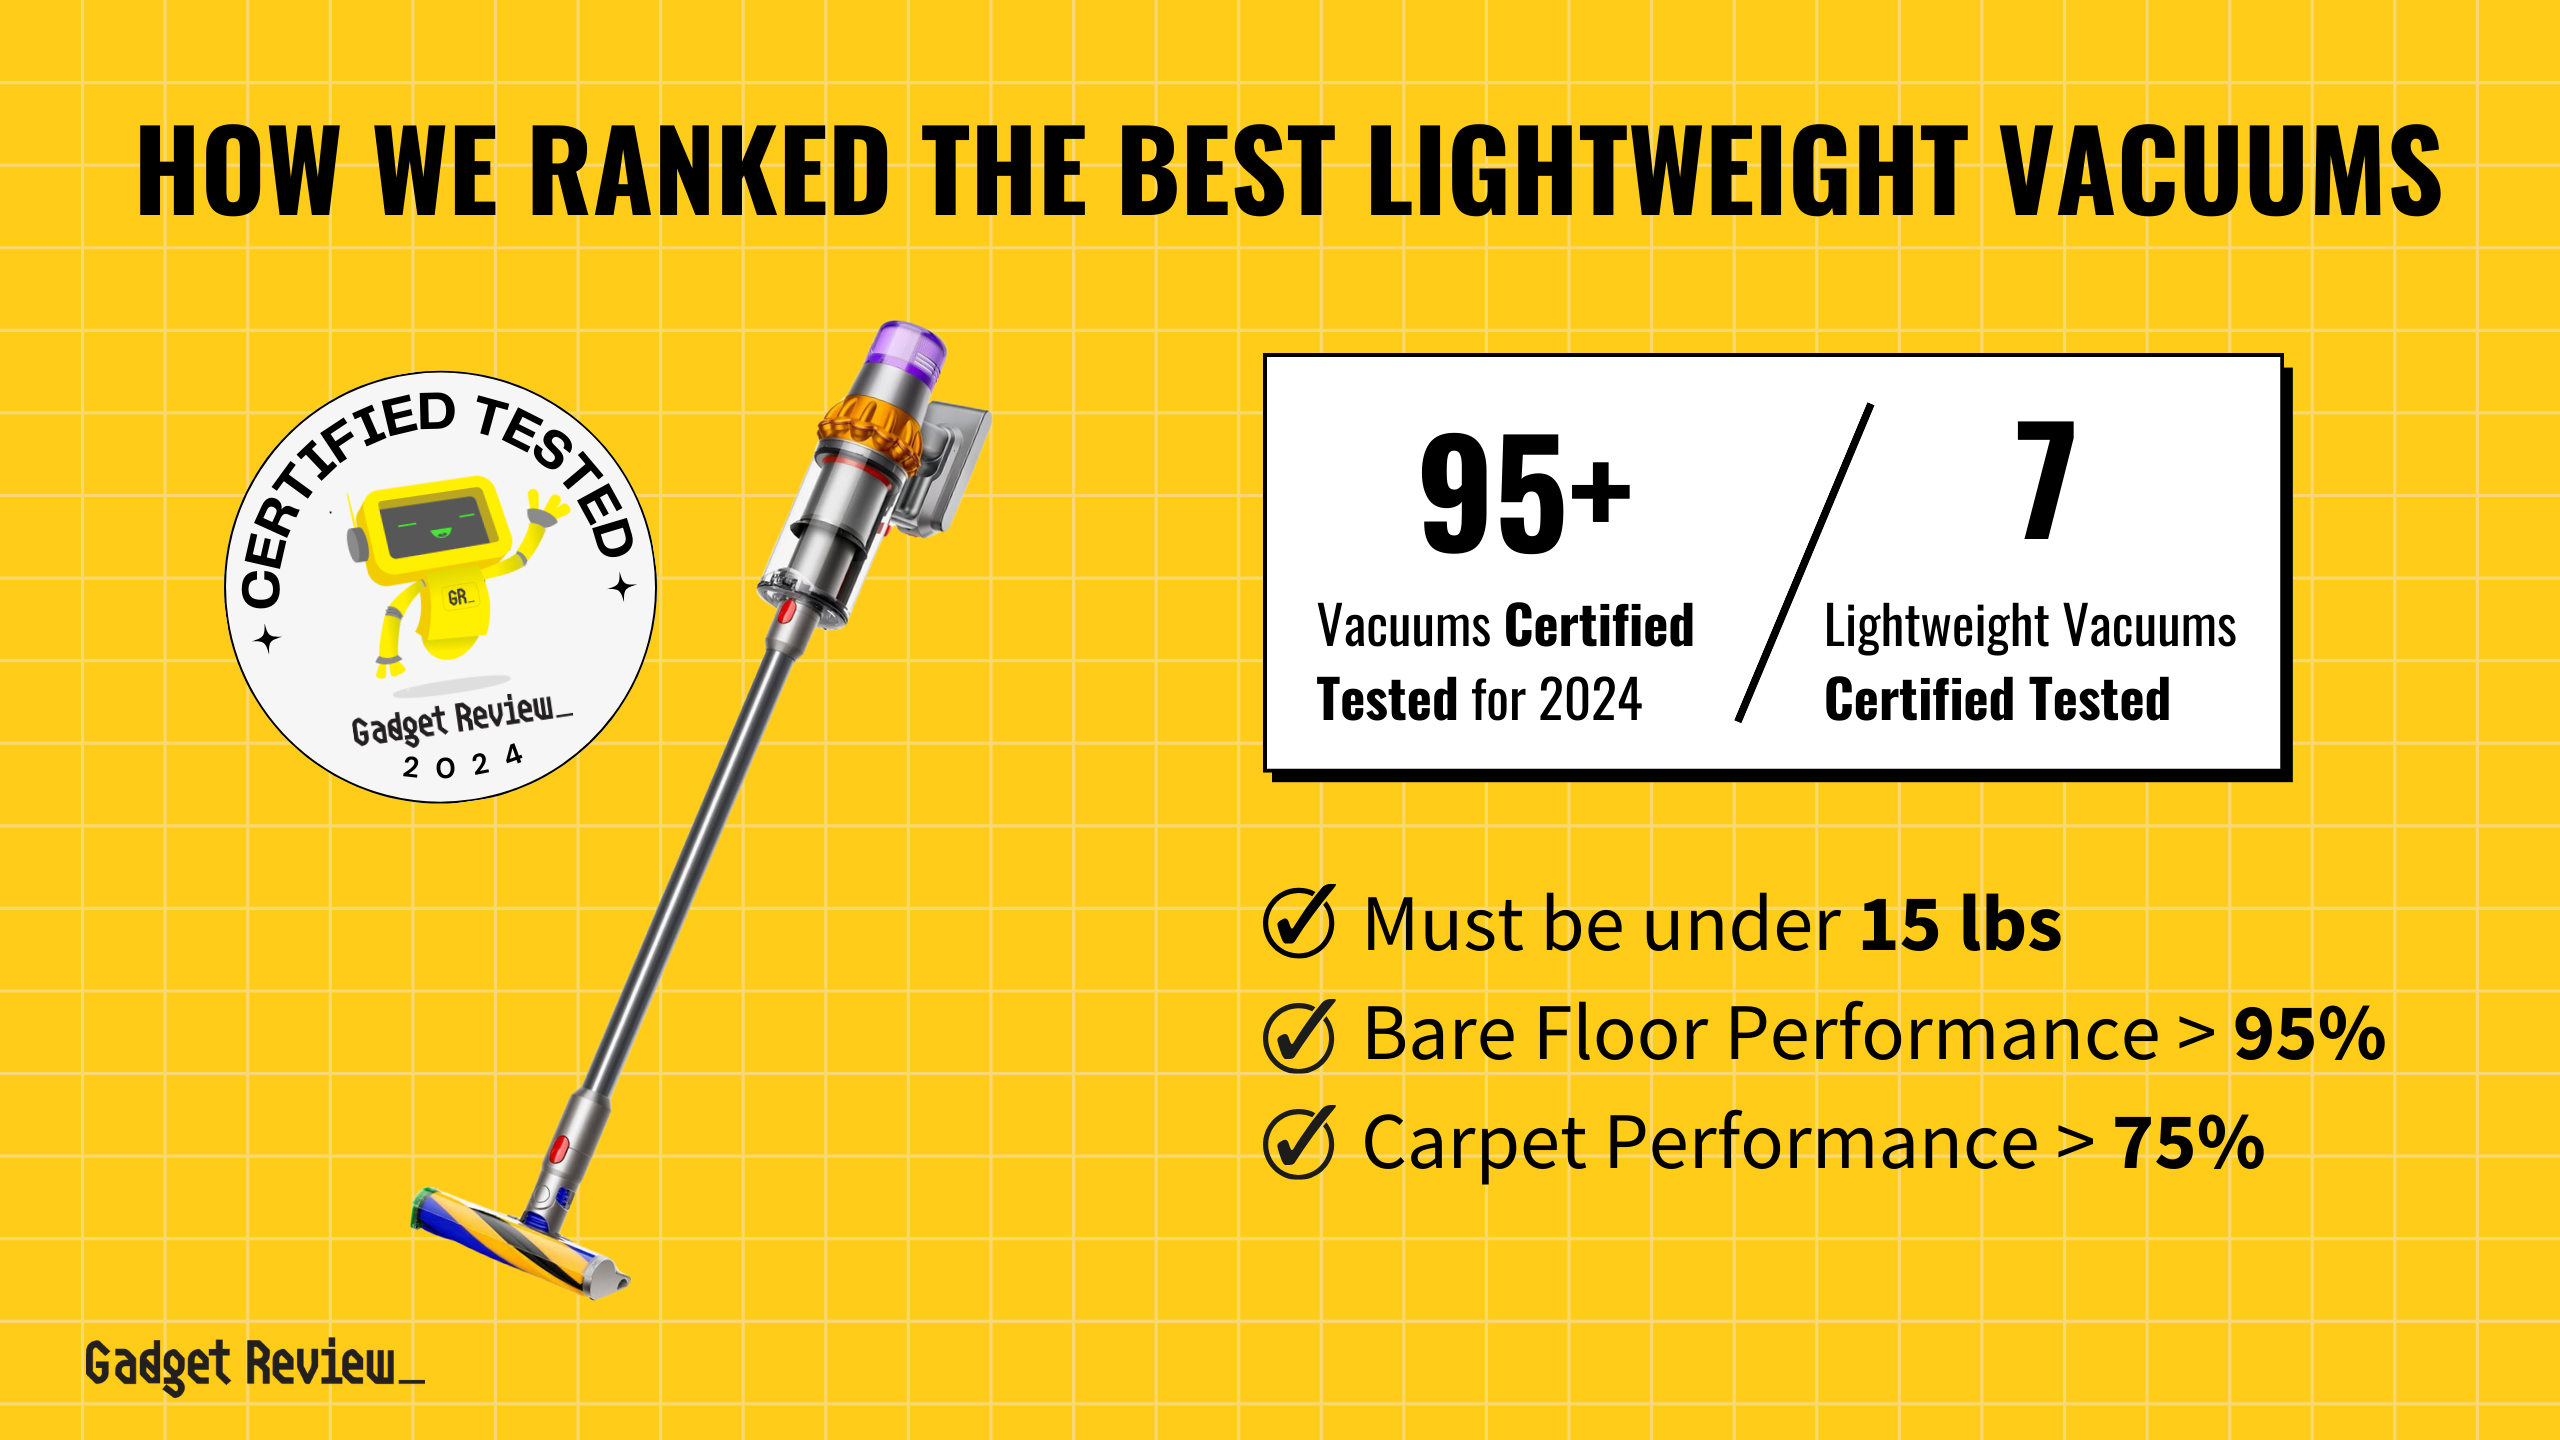 7 Top Lightweight Vacuums of 2024 Ranked